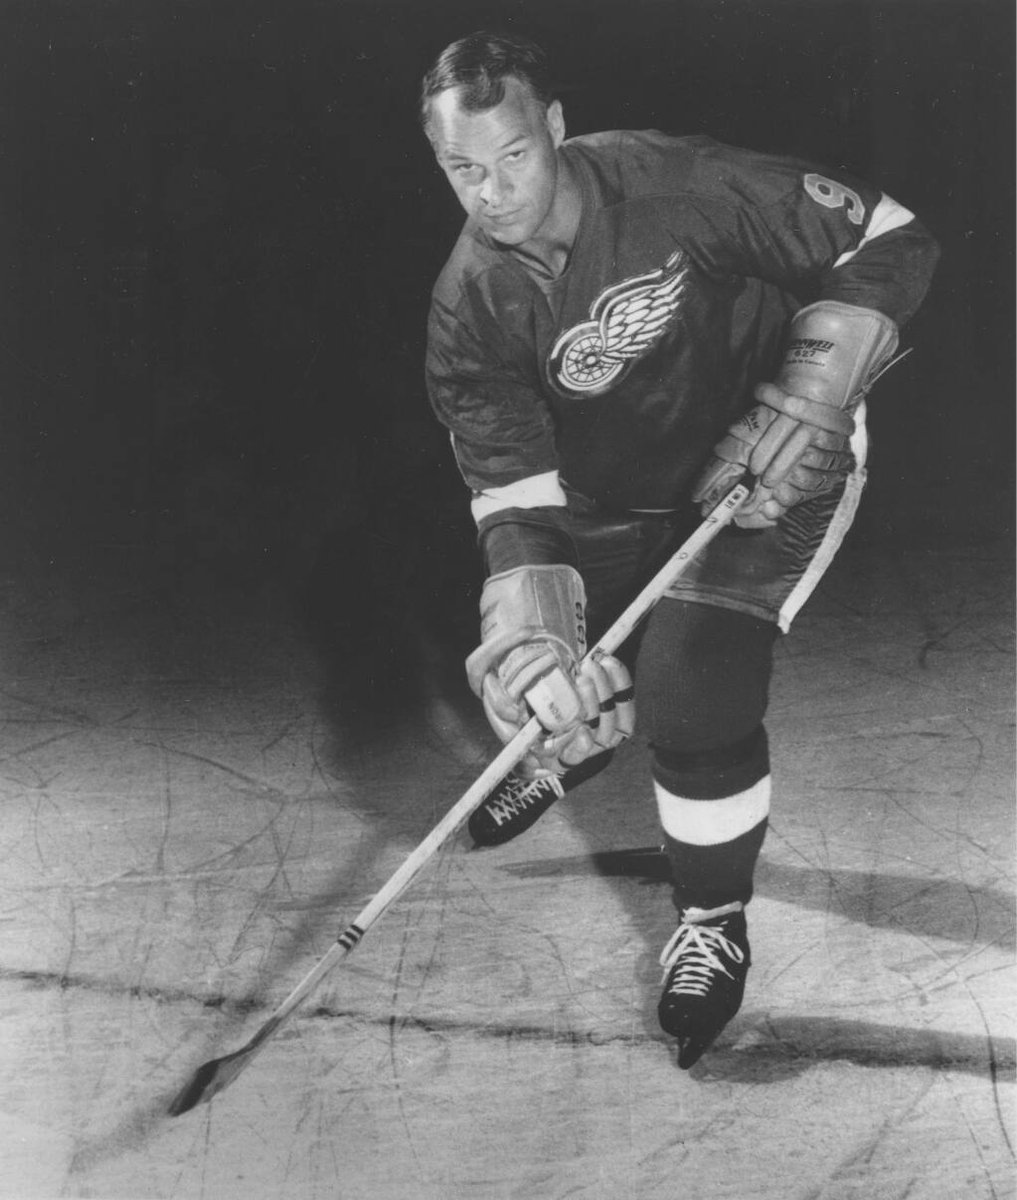 #Today #14November #Year1964
NHL Record:
Detroit Red Wings Gordie Howe sets NHL record 627th career goal
Know more at : en.wikipedia.org/wiki/List_of_N…